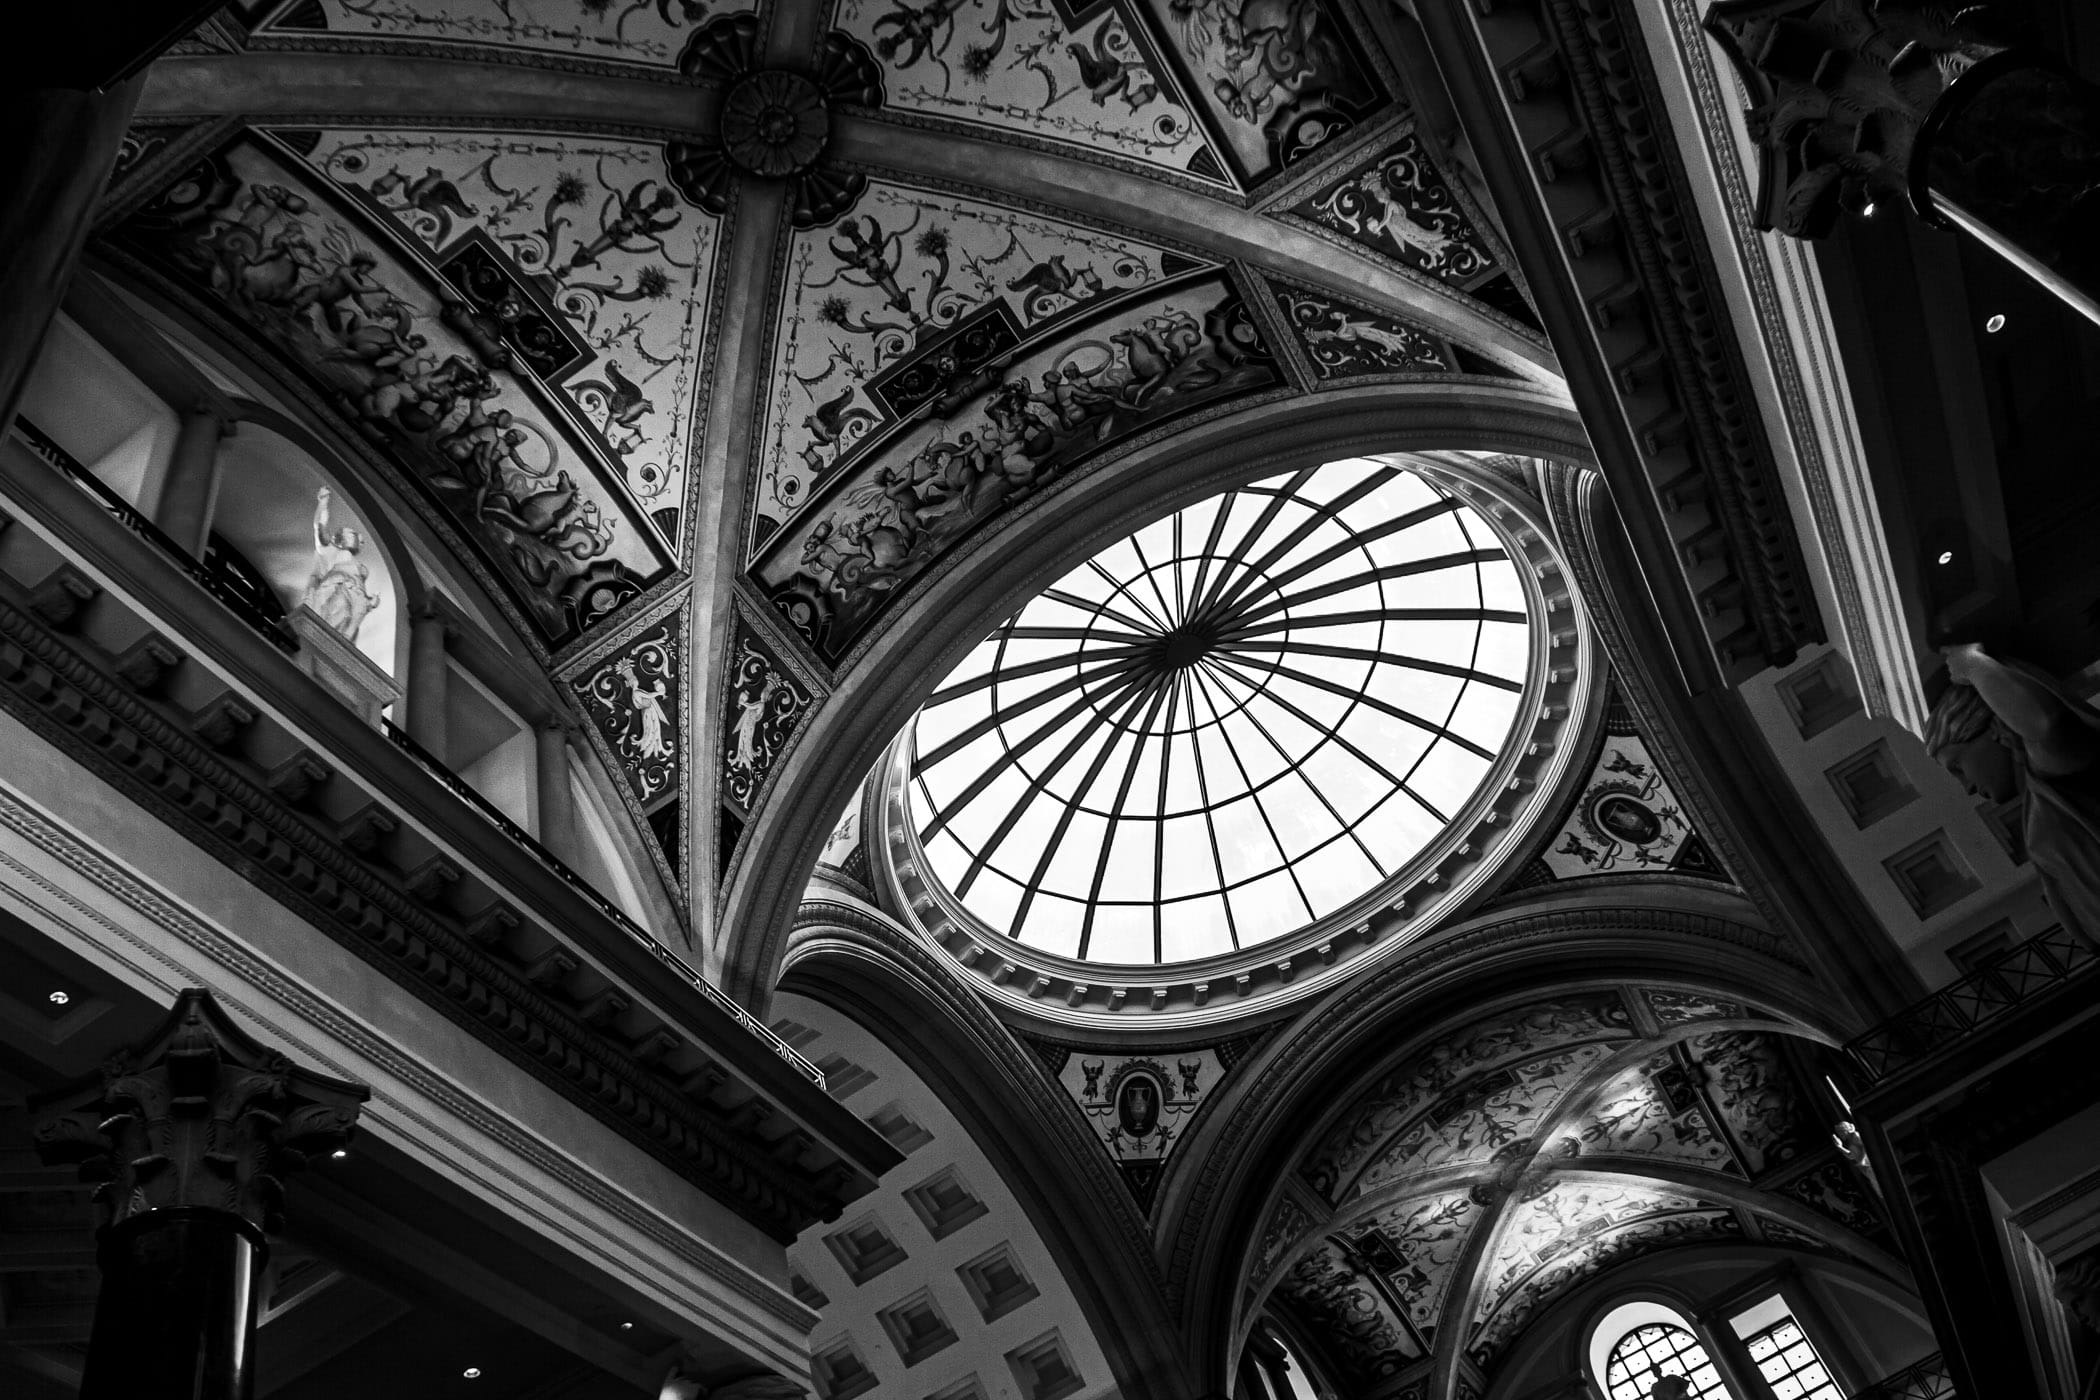 Interior architectural detail of the Forum Shops at Caesars Palace, Las Vegas.